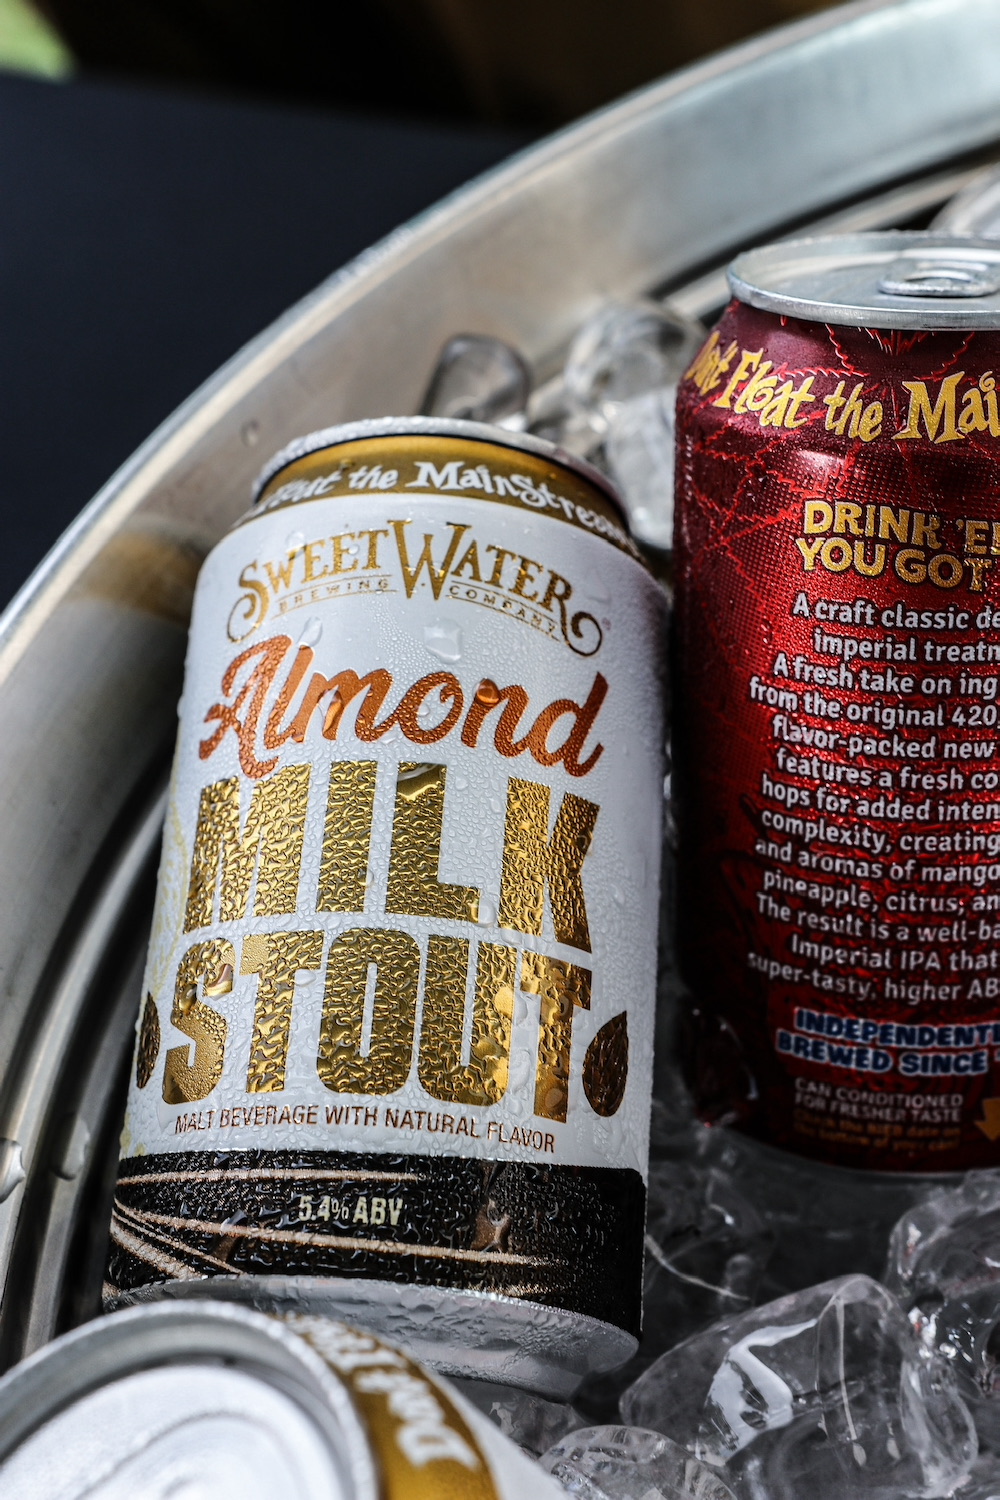 Sweetwater Almond Milk Stout being served at Cheers to One Year: Corners One Year Anniversary